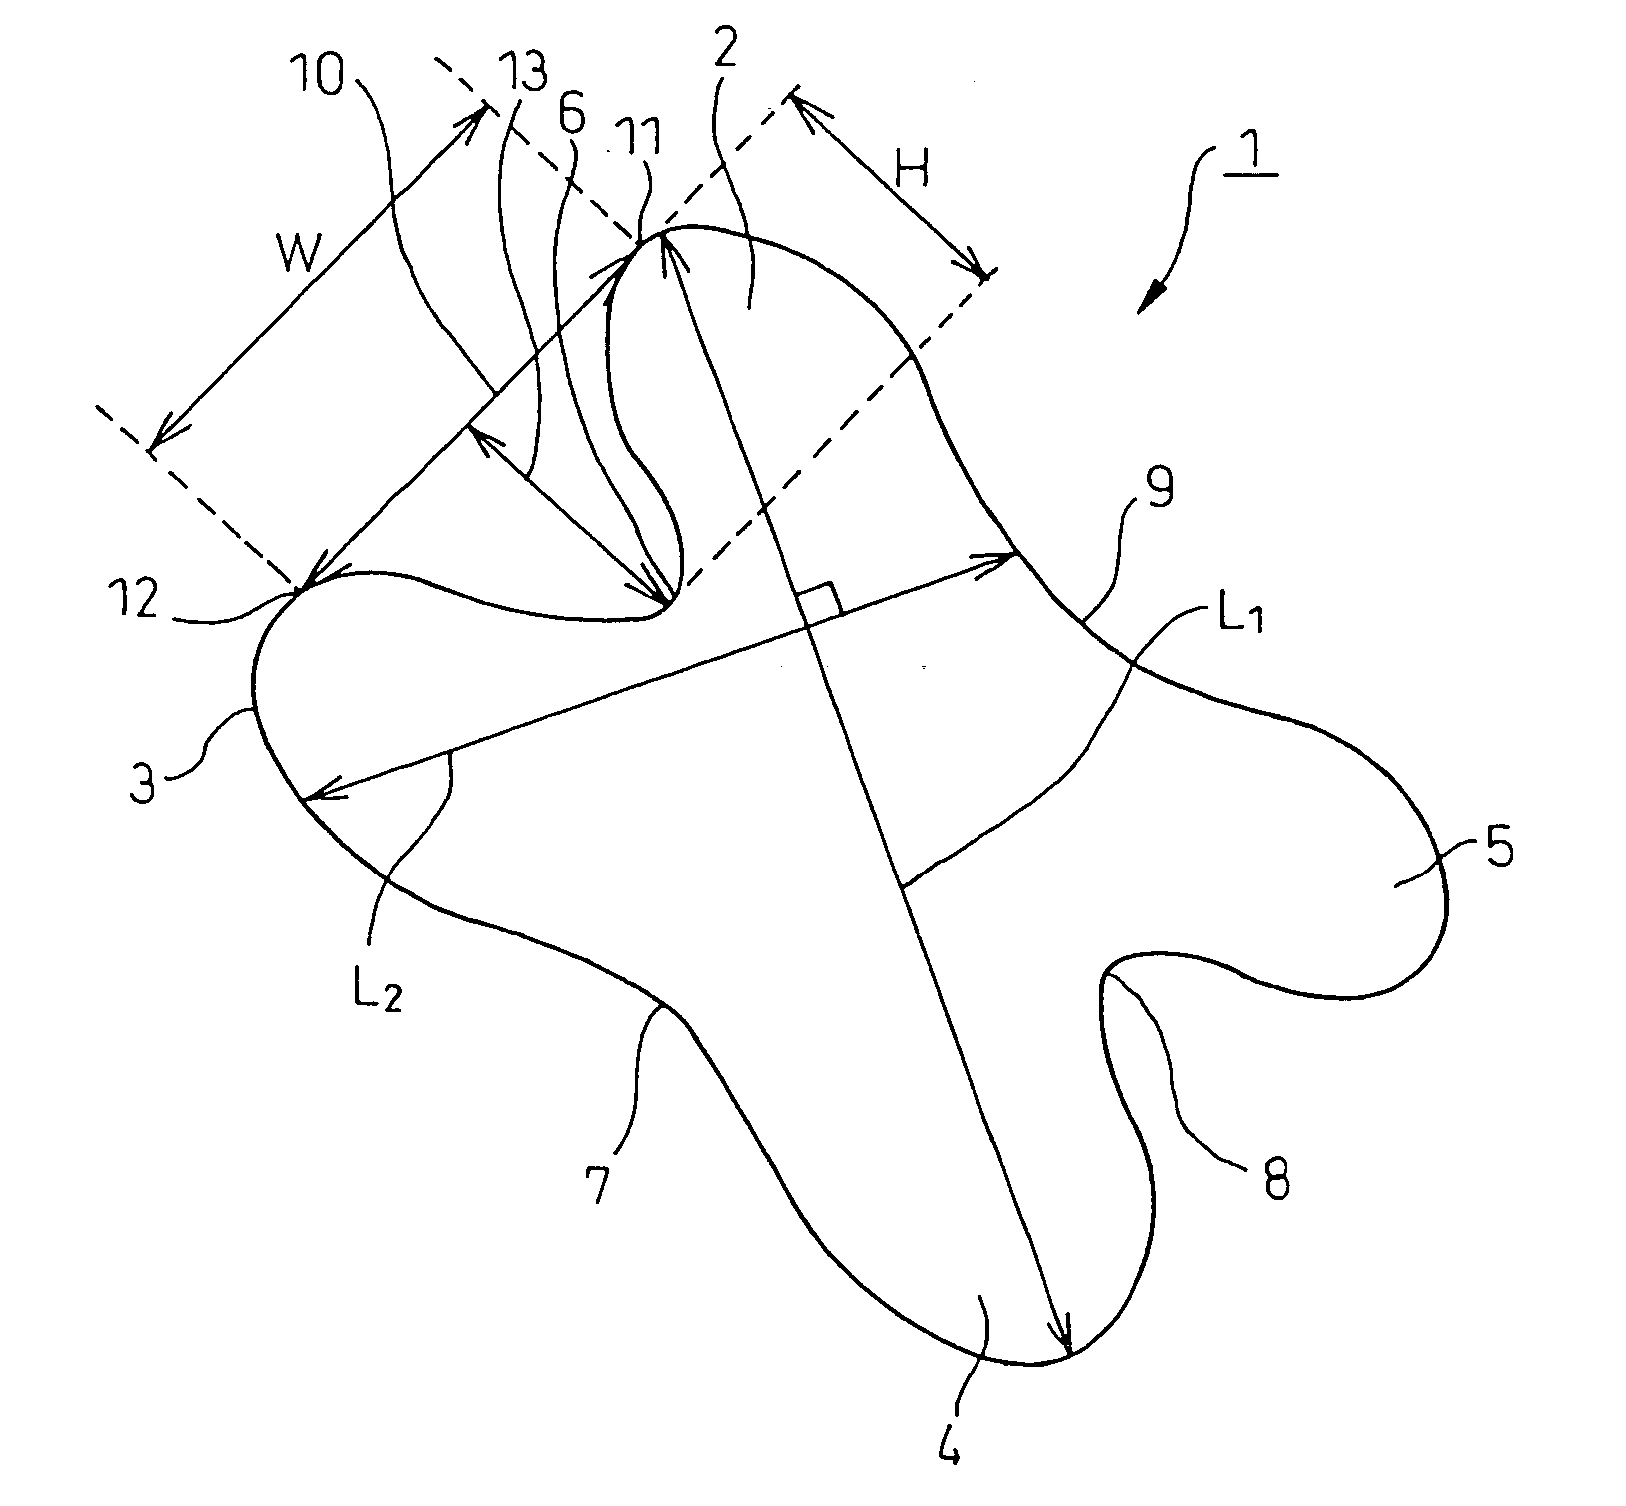 Polyester false-twist yarn and method of manufacturing the yarn